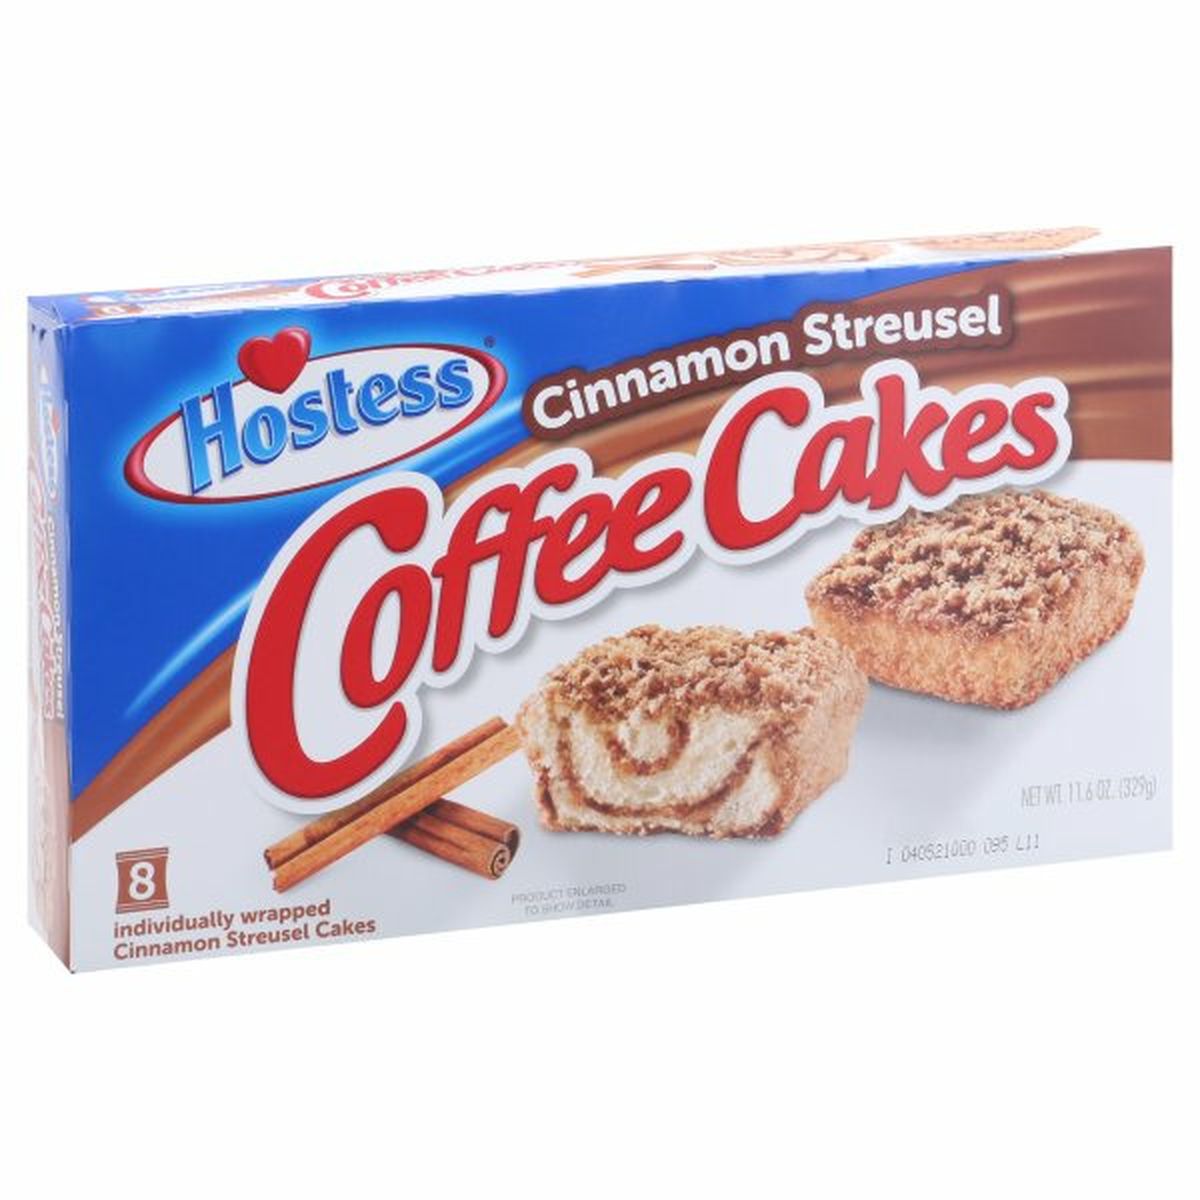 Calories in Hostess Coffee Cakes Cakes, Cinnamon Streusel, 8 Pack